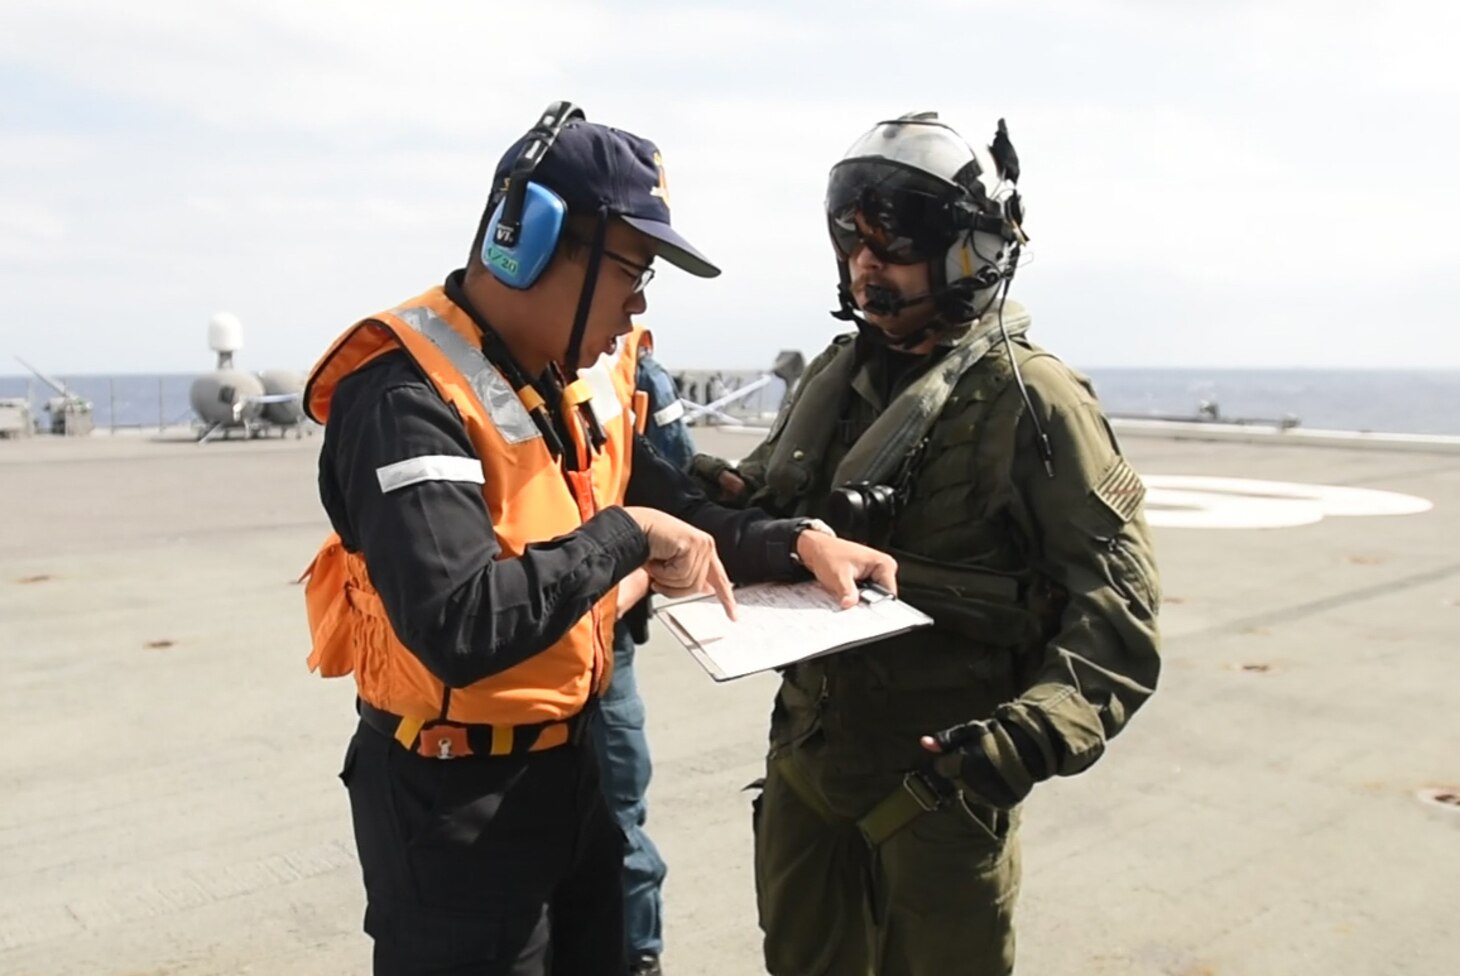 PHILIPPINE SEA (Oct. 31, 2018) Naval Aircrewman (Helicopter) 2nd Class Ryan Quinn, assigned to Helicopter Maritime Strike Squadron (HSM) 77, and a member of the Japan Maritime Self-Defense Force ship JS Huyuga (DDH-181) discuss an Acquisition and Cross Servicing Agreement Logistics Exchange during Keen Sword 19. Keen Sword 19 is a joint, bilateral field-training exercise involving U.S. military and Japan Maritime Self-Defense Force personnel, designed to increase combat readiness and interoperability of the Japan-U.S. alliance.